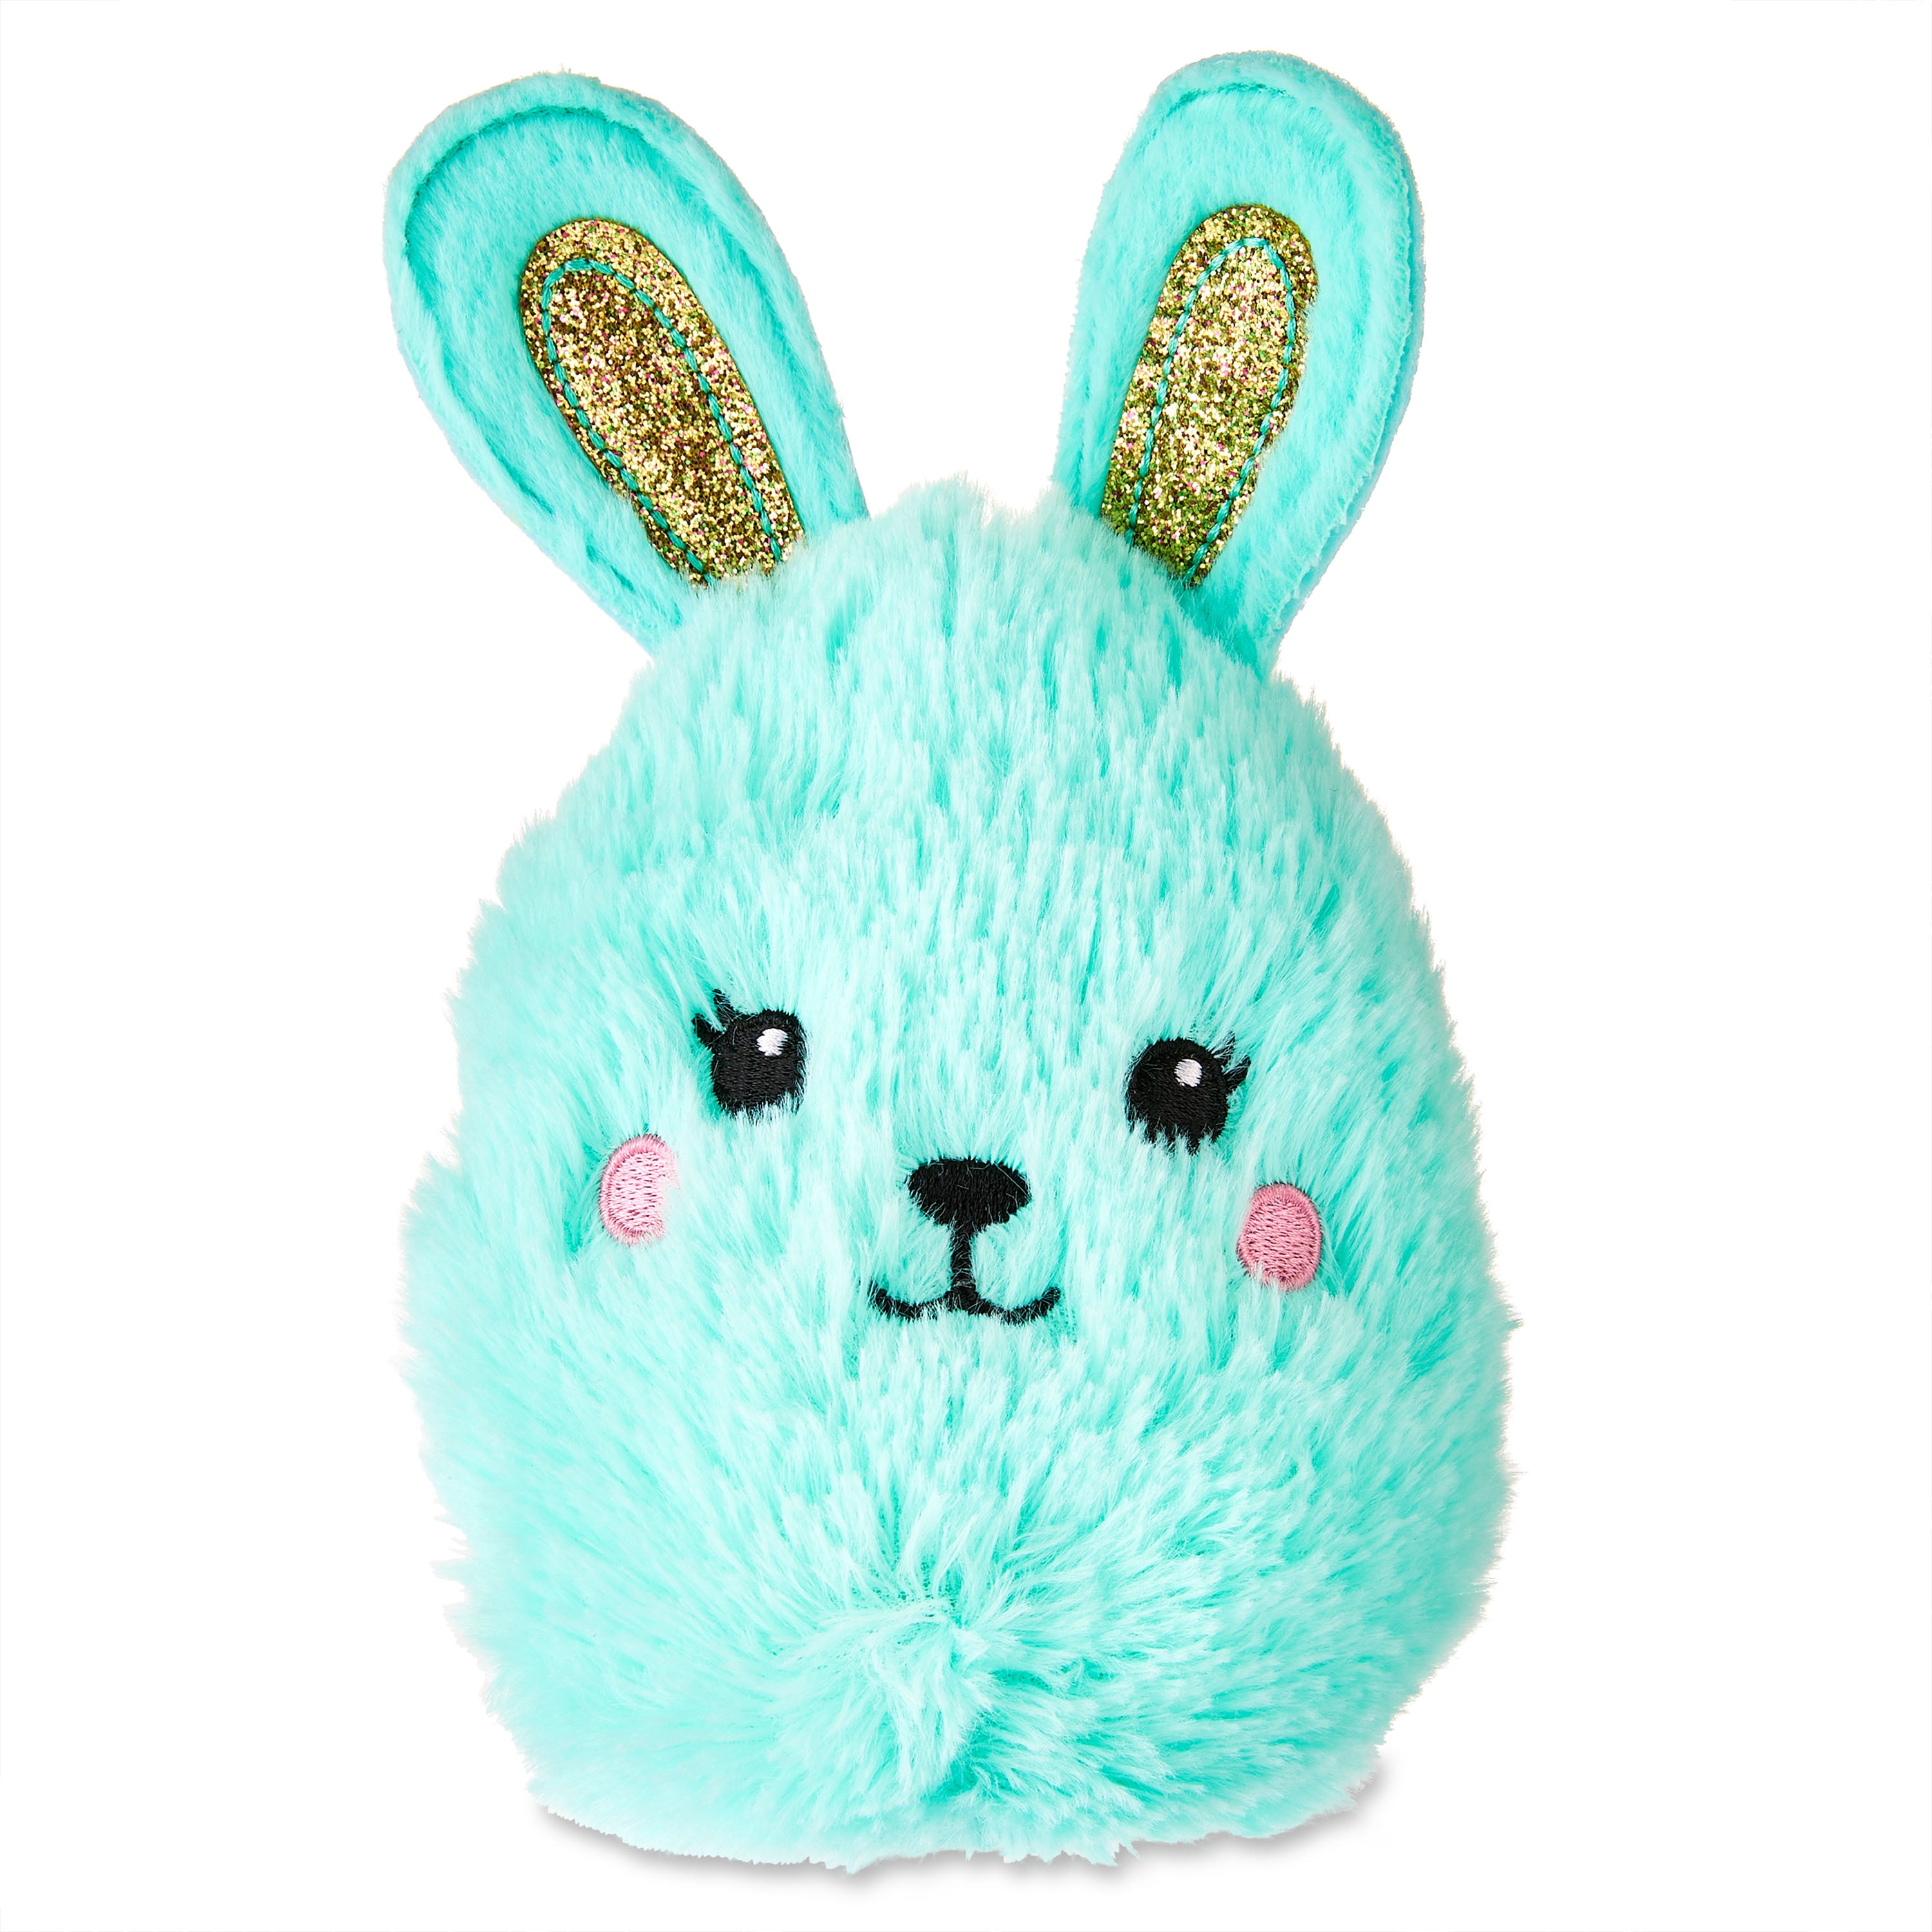 WAY TO CELEBRATE! Way To Celebrate Easter Oval Bunny Plush, Blue